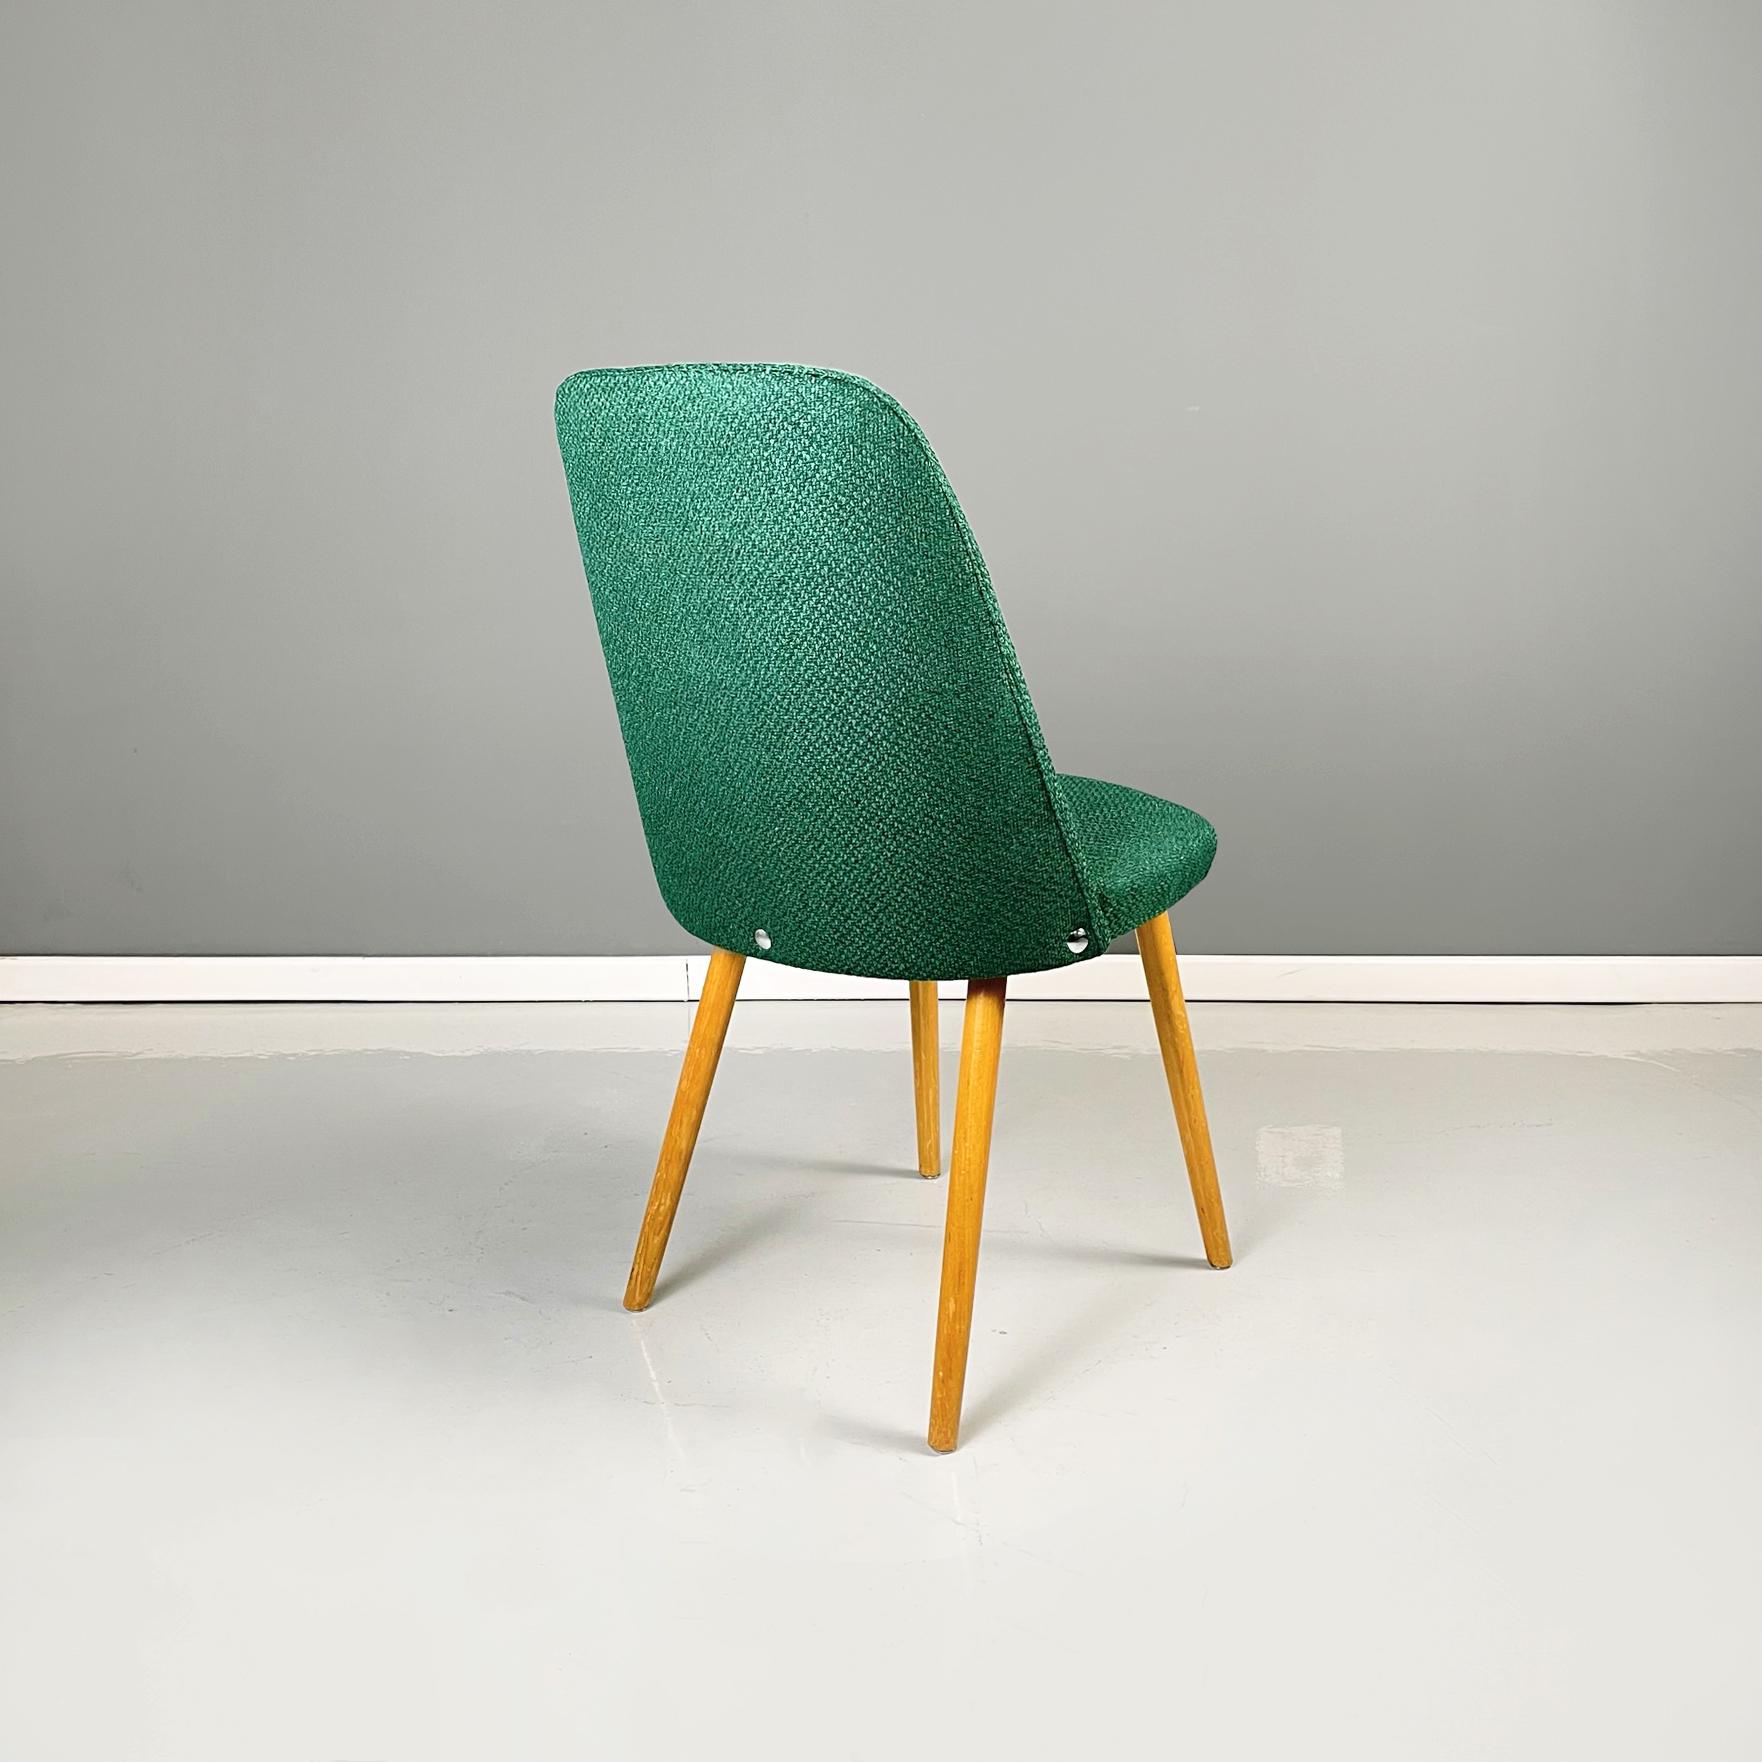 Italian Mid-Century Modern Chairs in Forest Green Fabric and Wood, 1960s For Sale 1